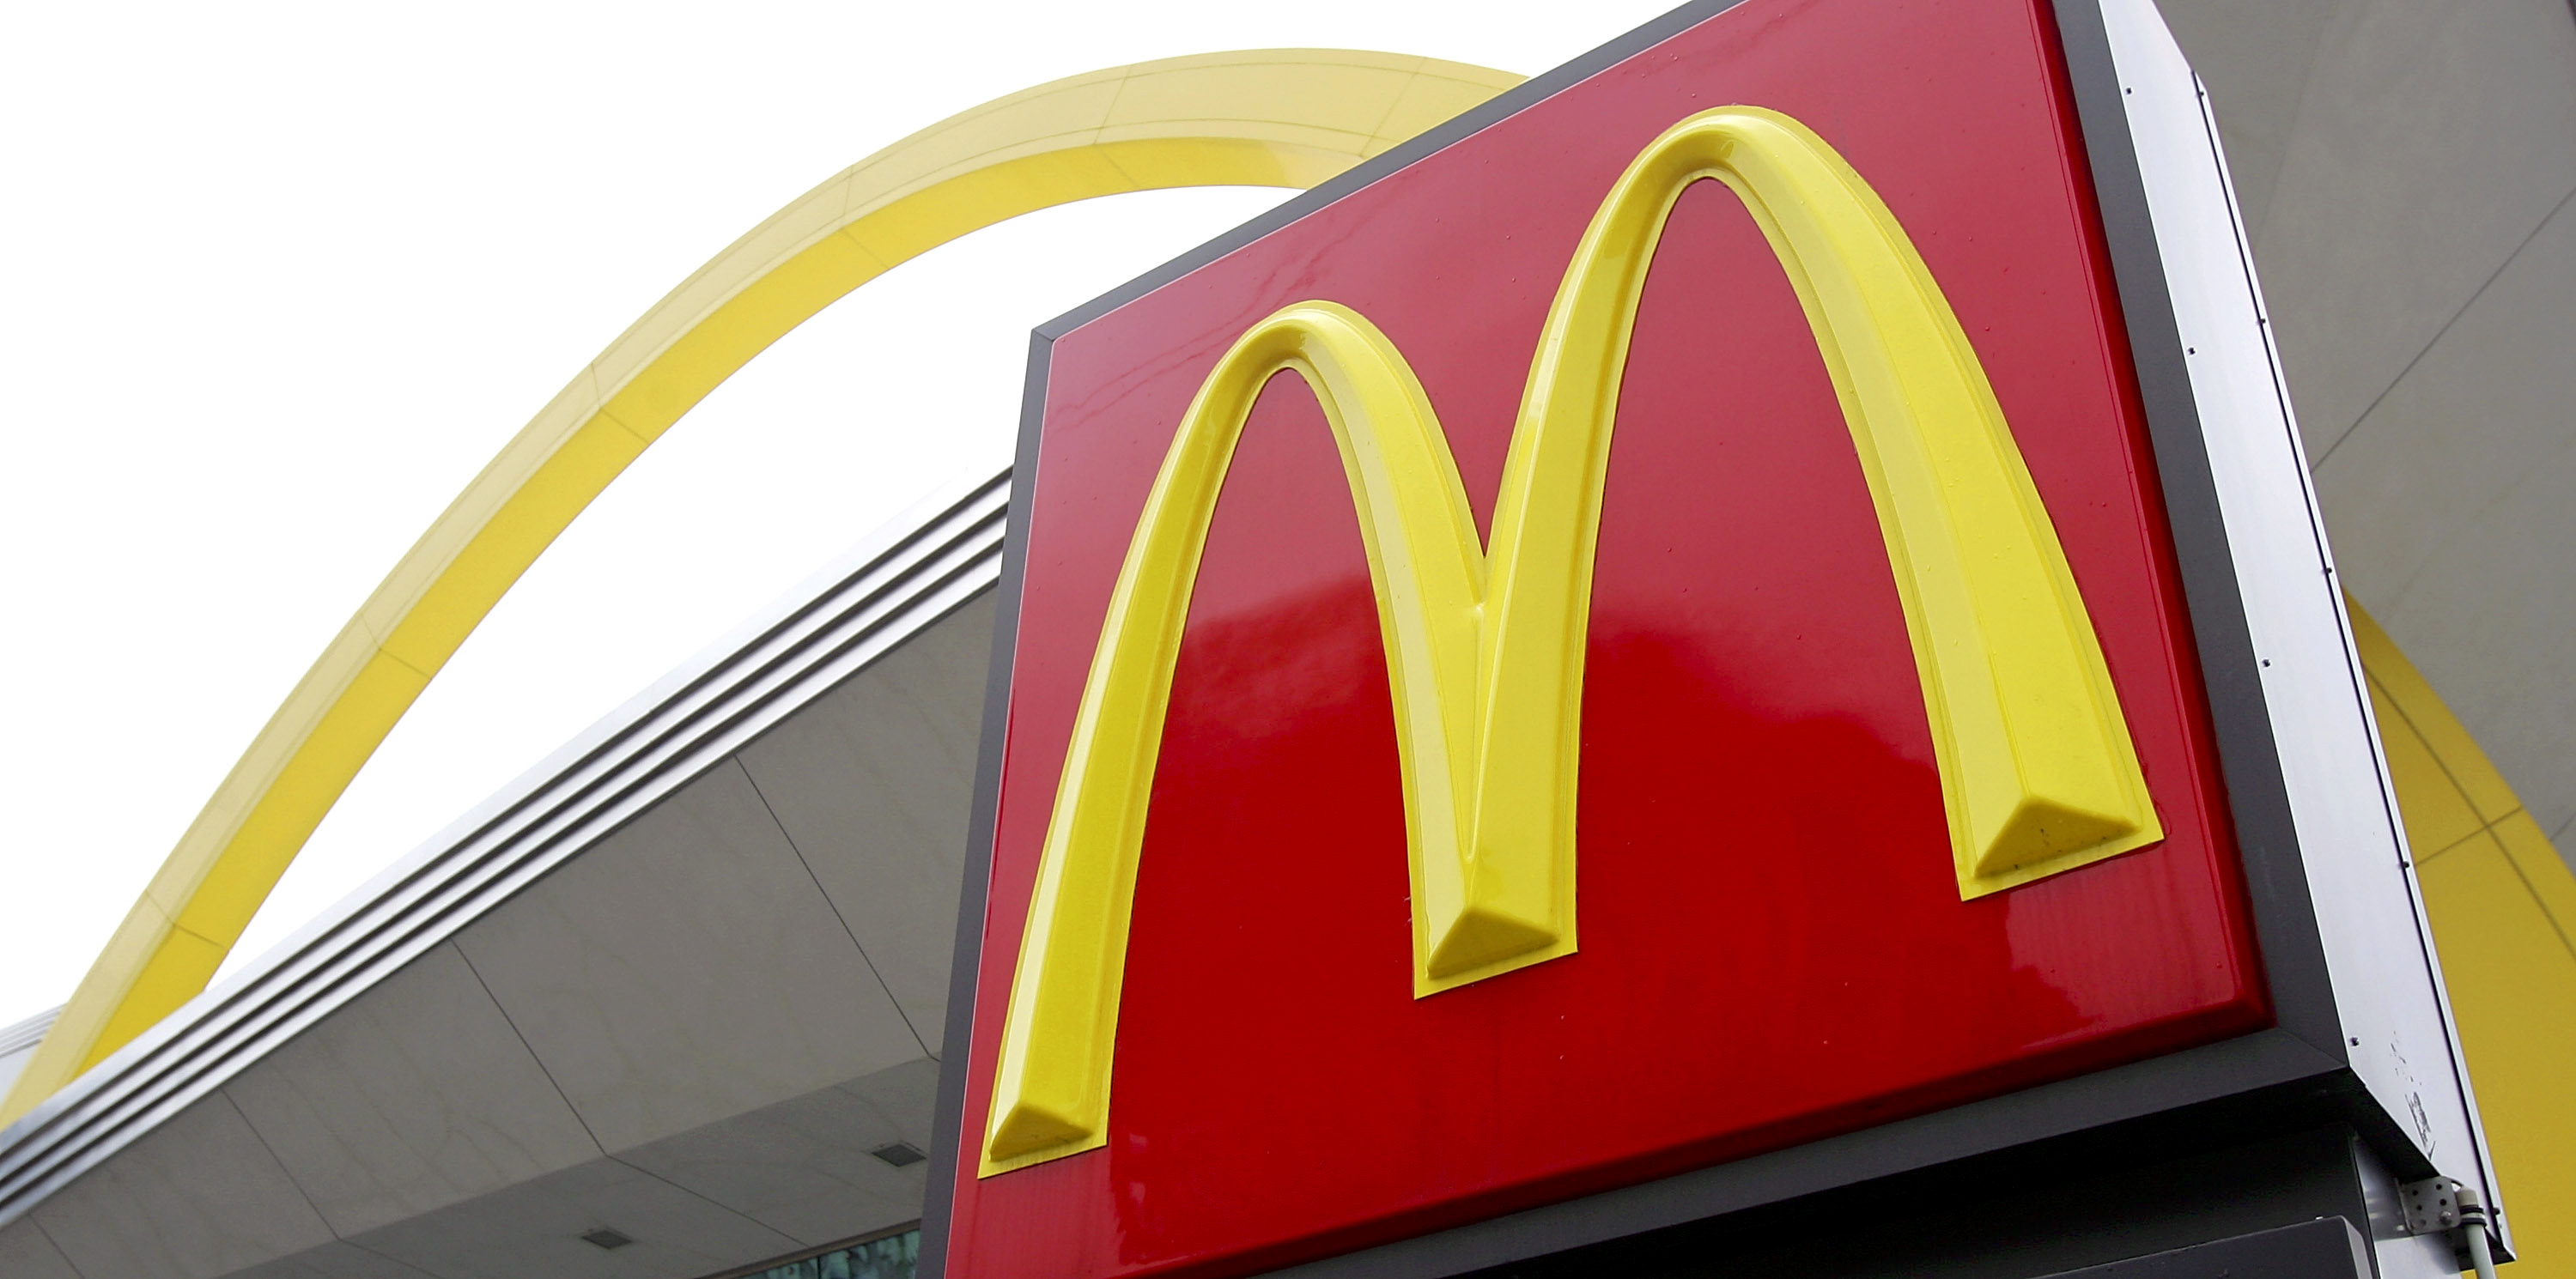 The McDonald's arches logo is displayed outside a McDonald's fast food restaurant (Bloomberg—Bloomberg via Getty Images)